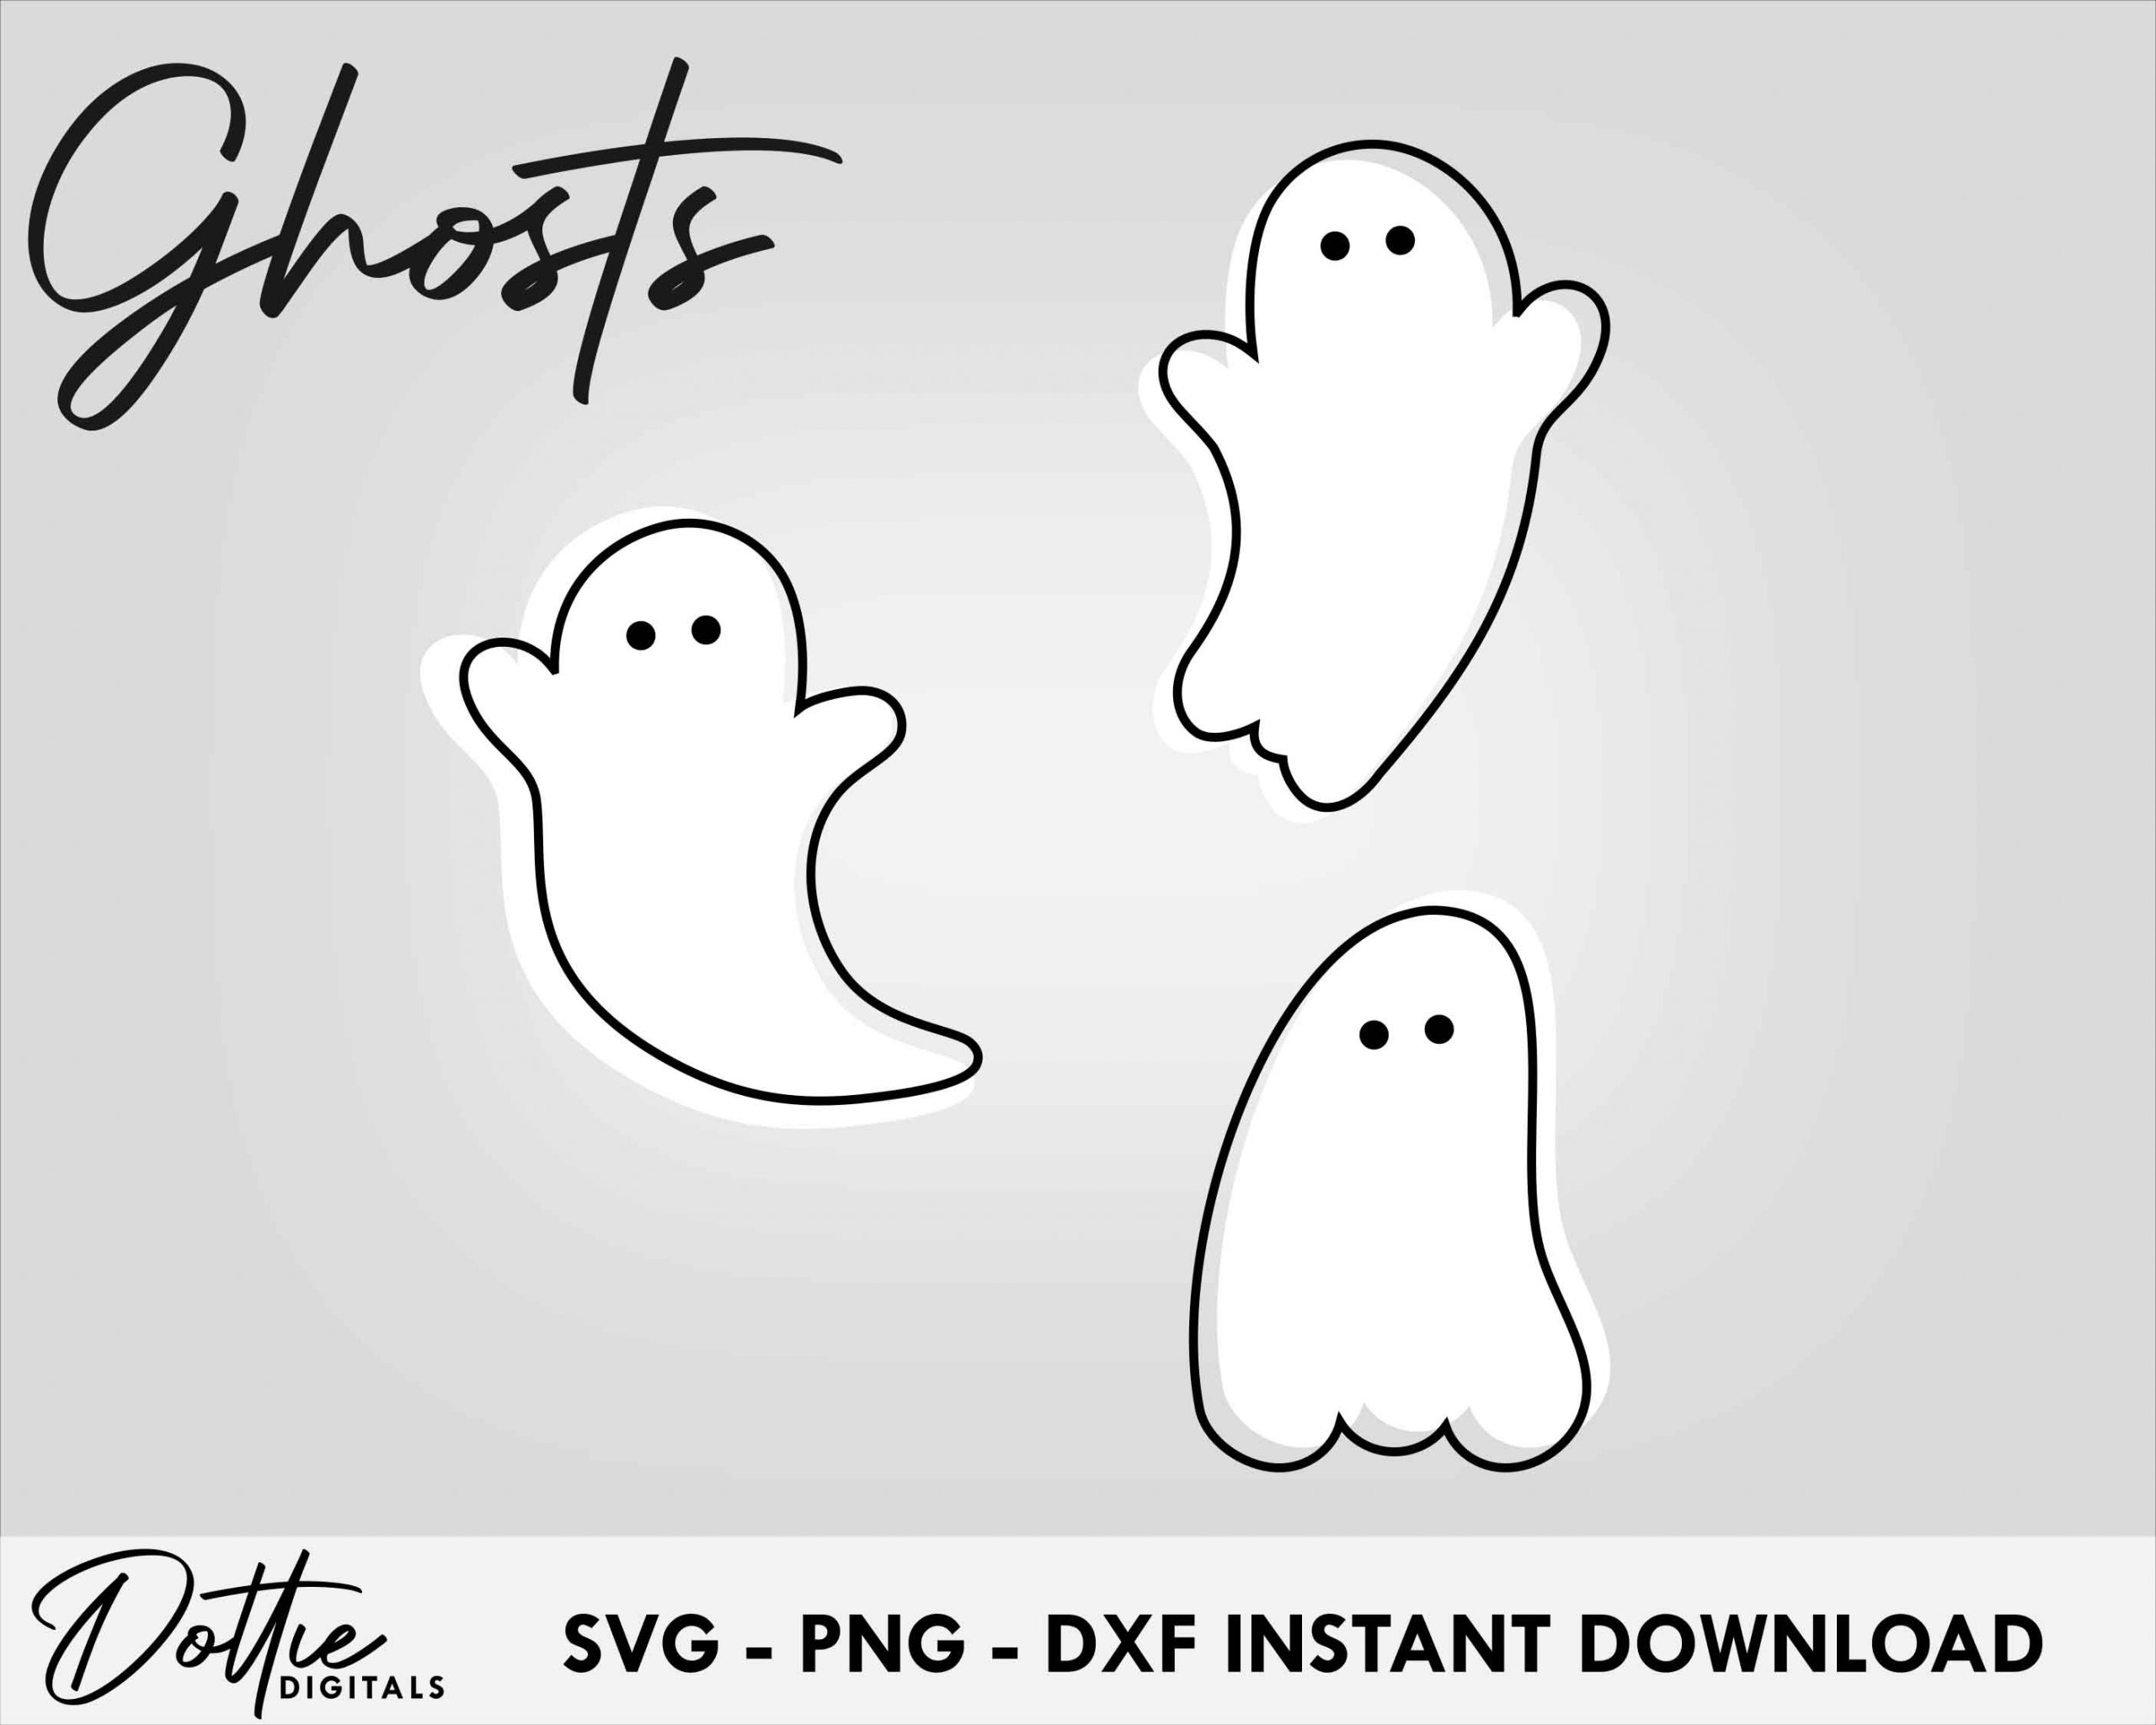 Ghost SVG Bundle 3 Halloween Ghosts SVGs PNG DXF Fall Cut File Designs Layered Cutting File Instant Digital Download Circut Silhouette Craft